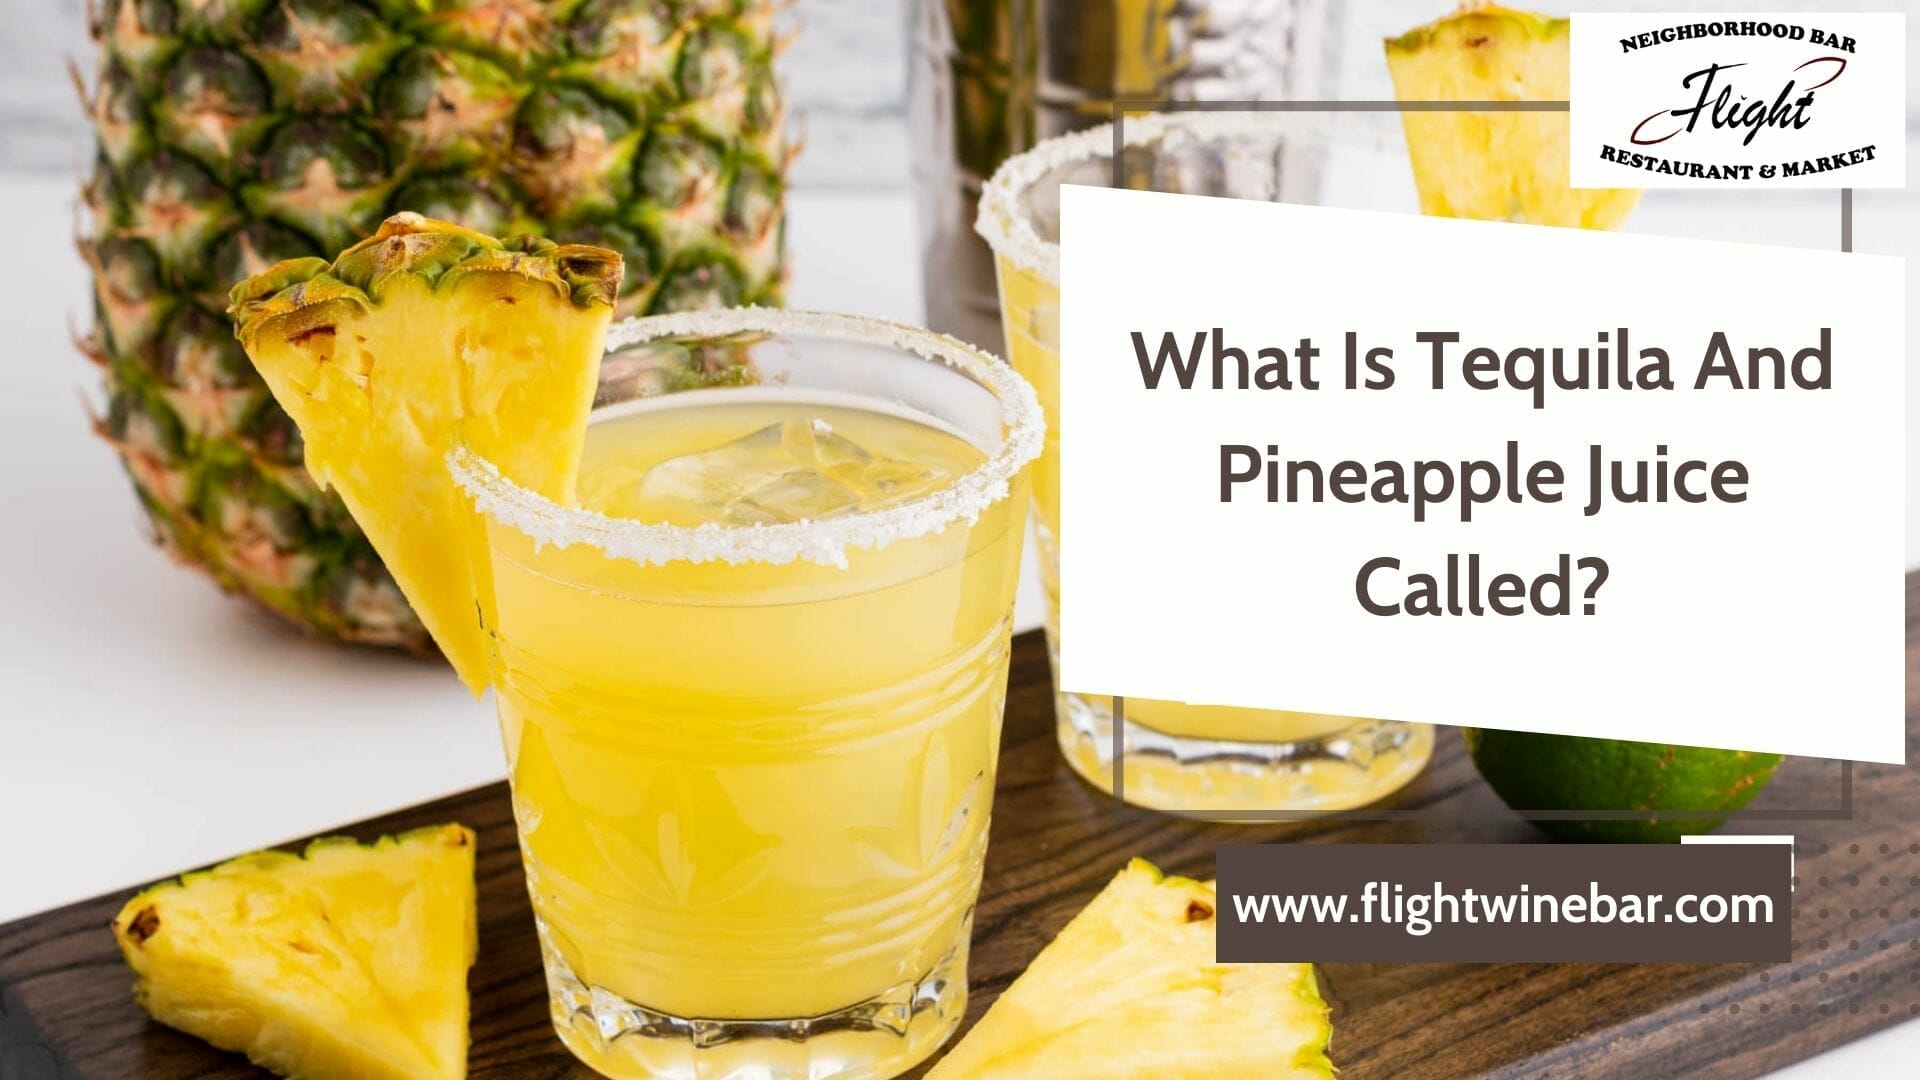 What Is Tequila And Pineapple Juice Called